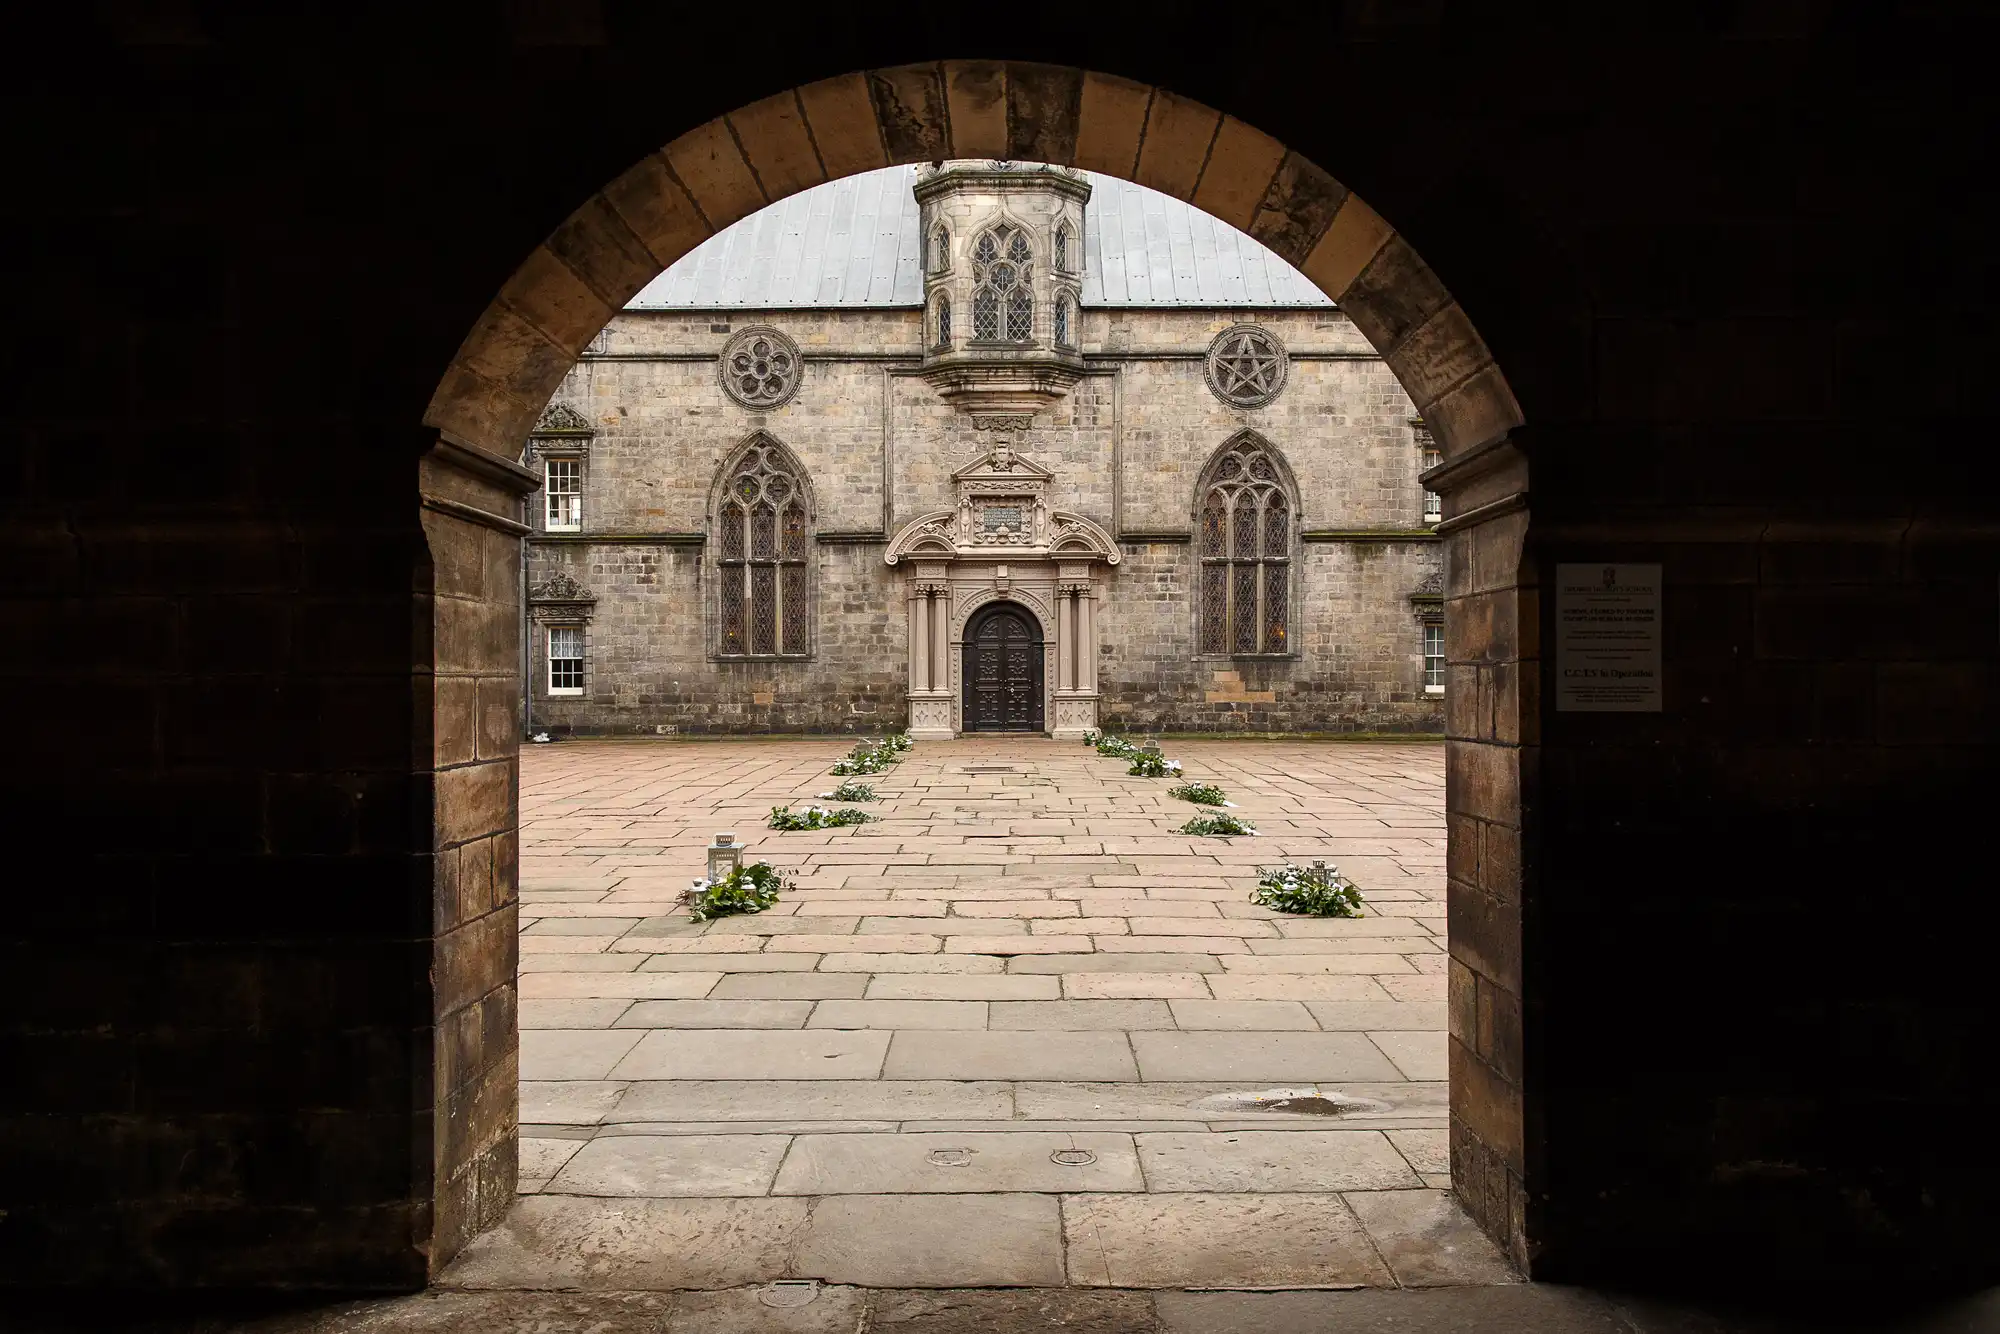 View of an historic stone building with a central arched entrance, seen through a large stone archway.